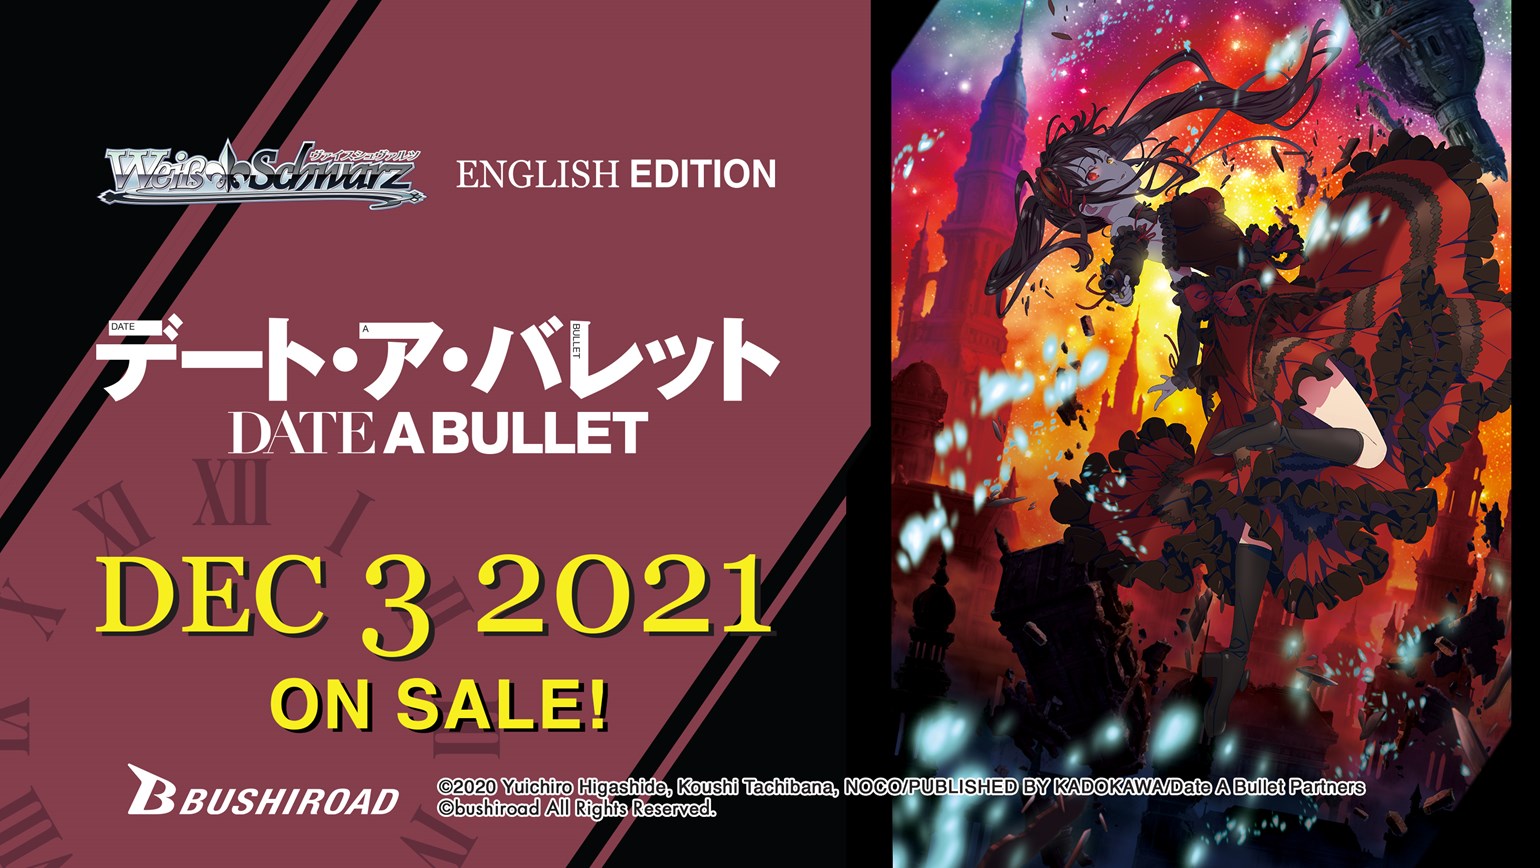 Weiss Schwarz: A climatic battle with Date A Bullet this December!